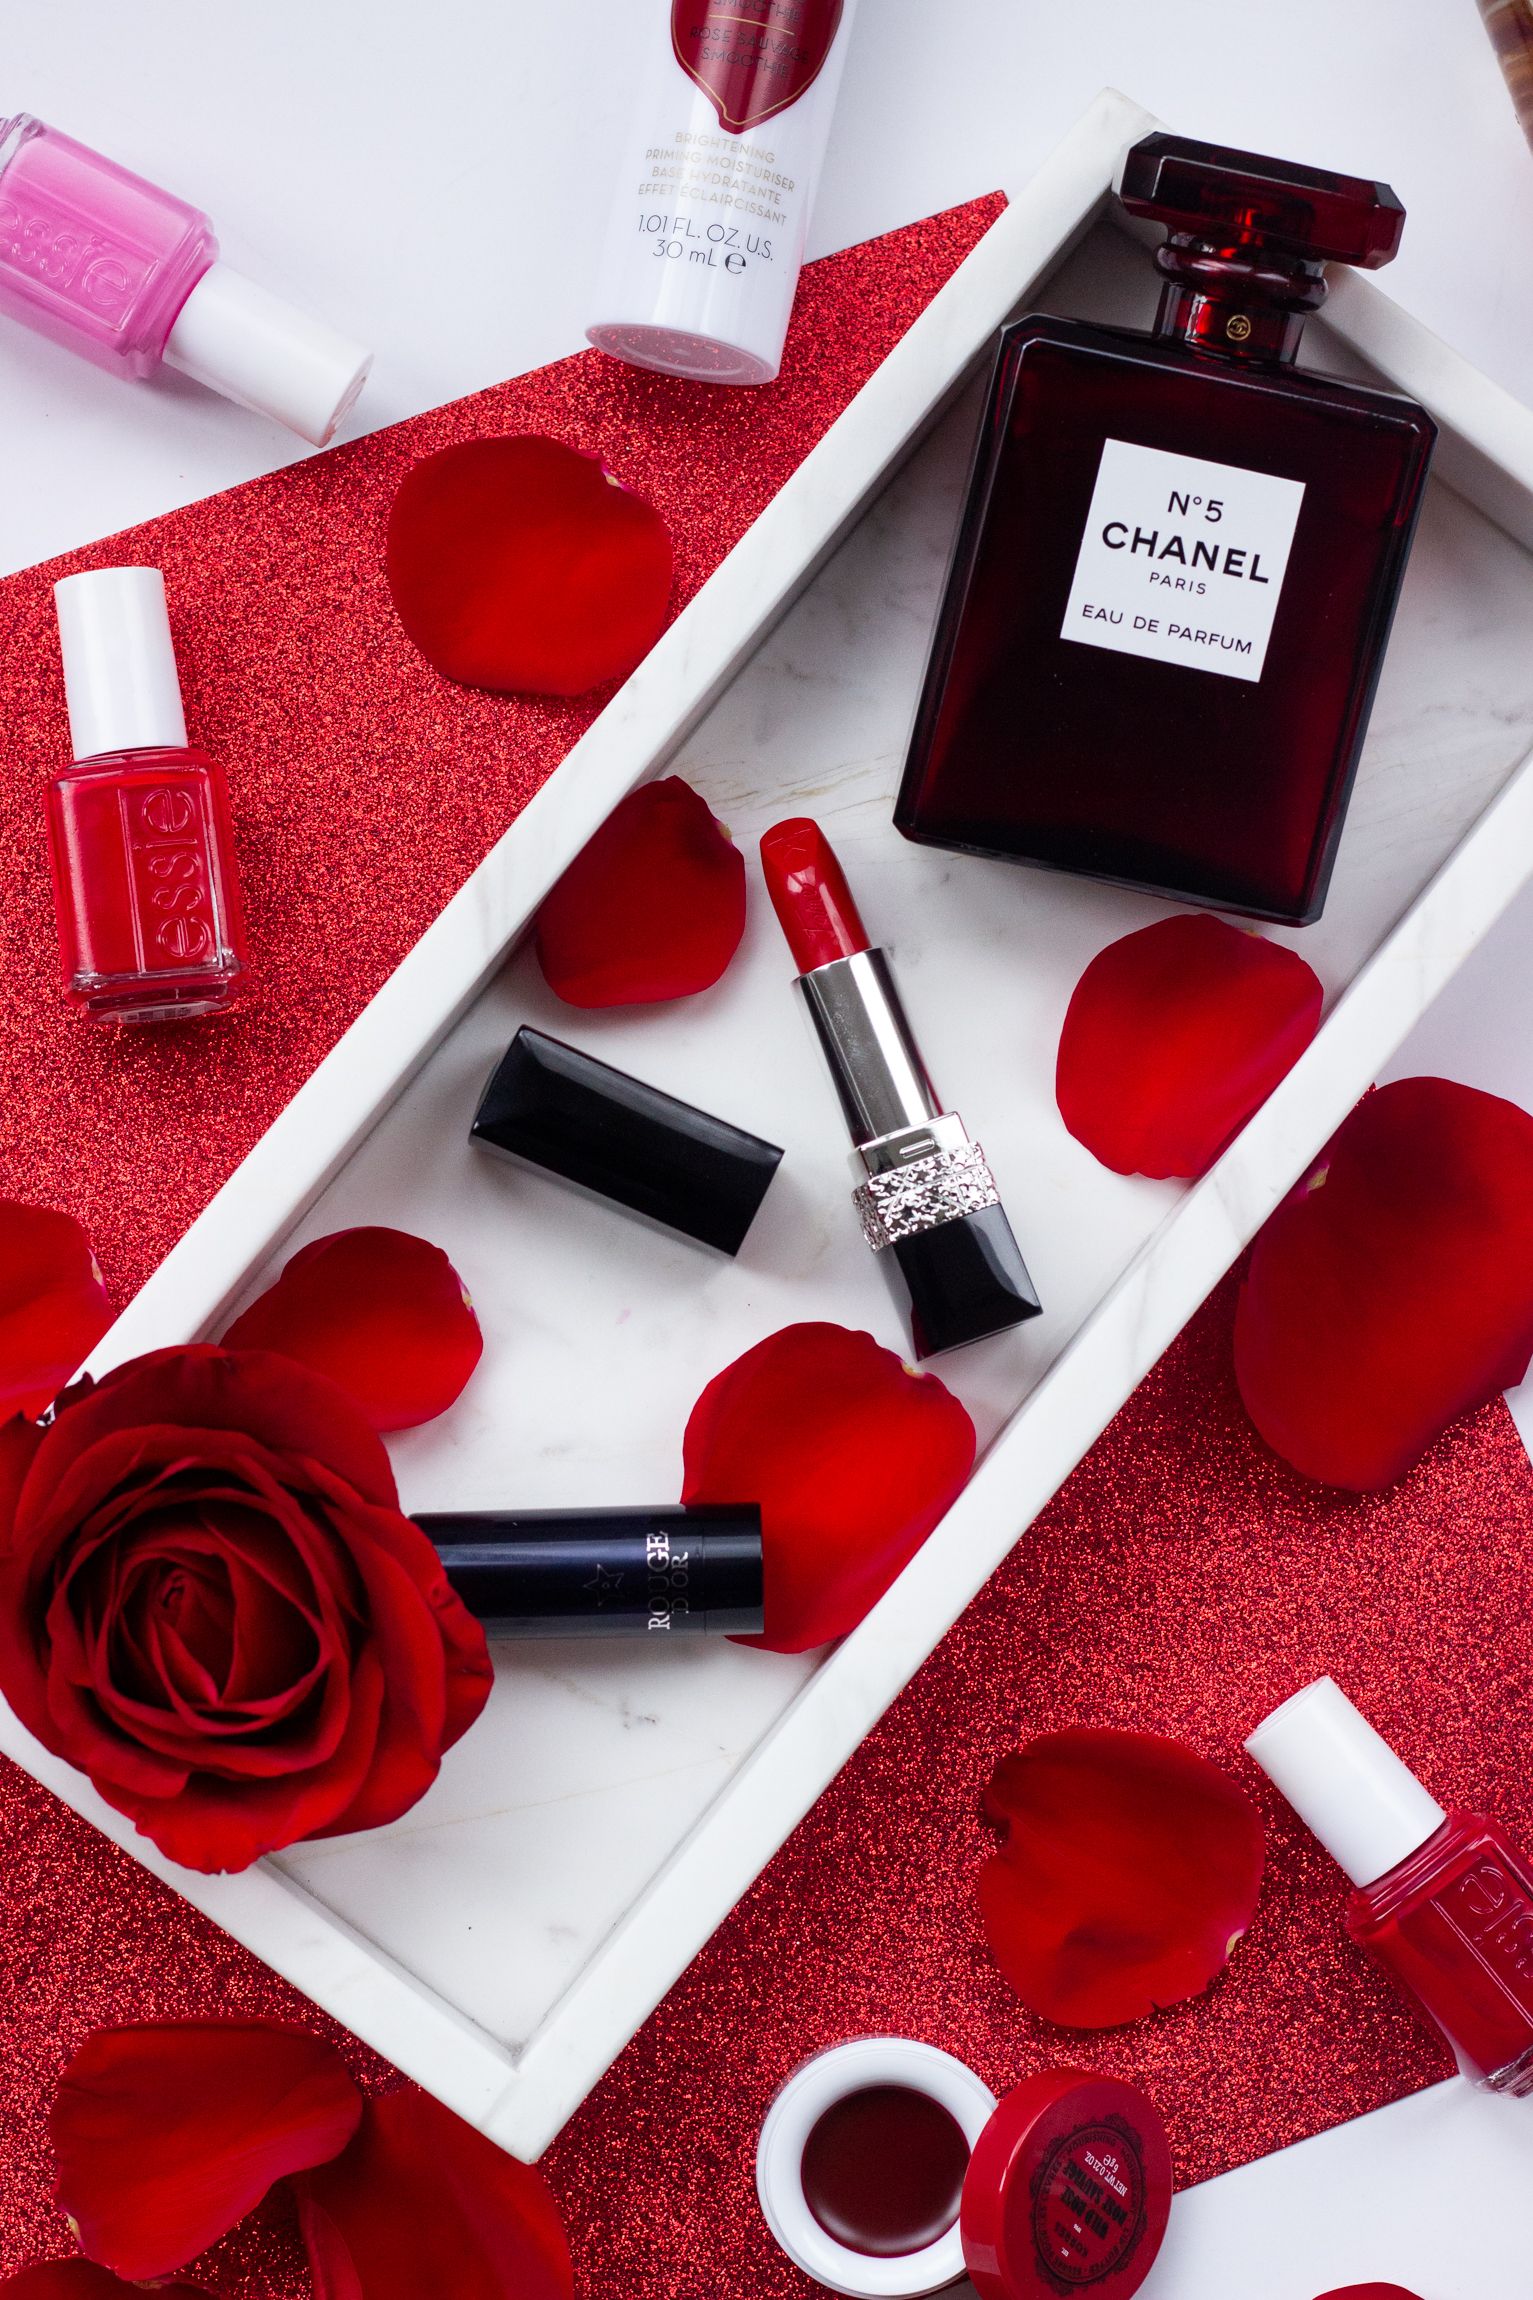 Valentine's Day Gift Guide - The Lane to Fashion Fashion